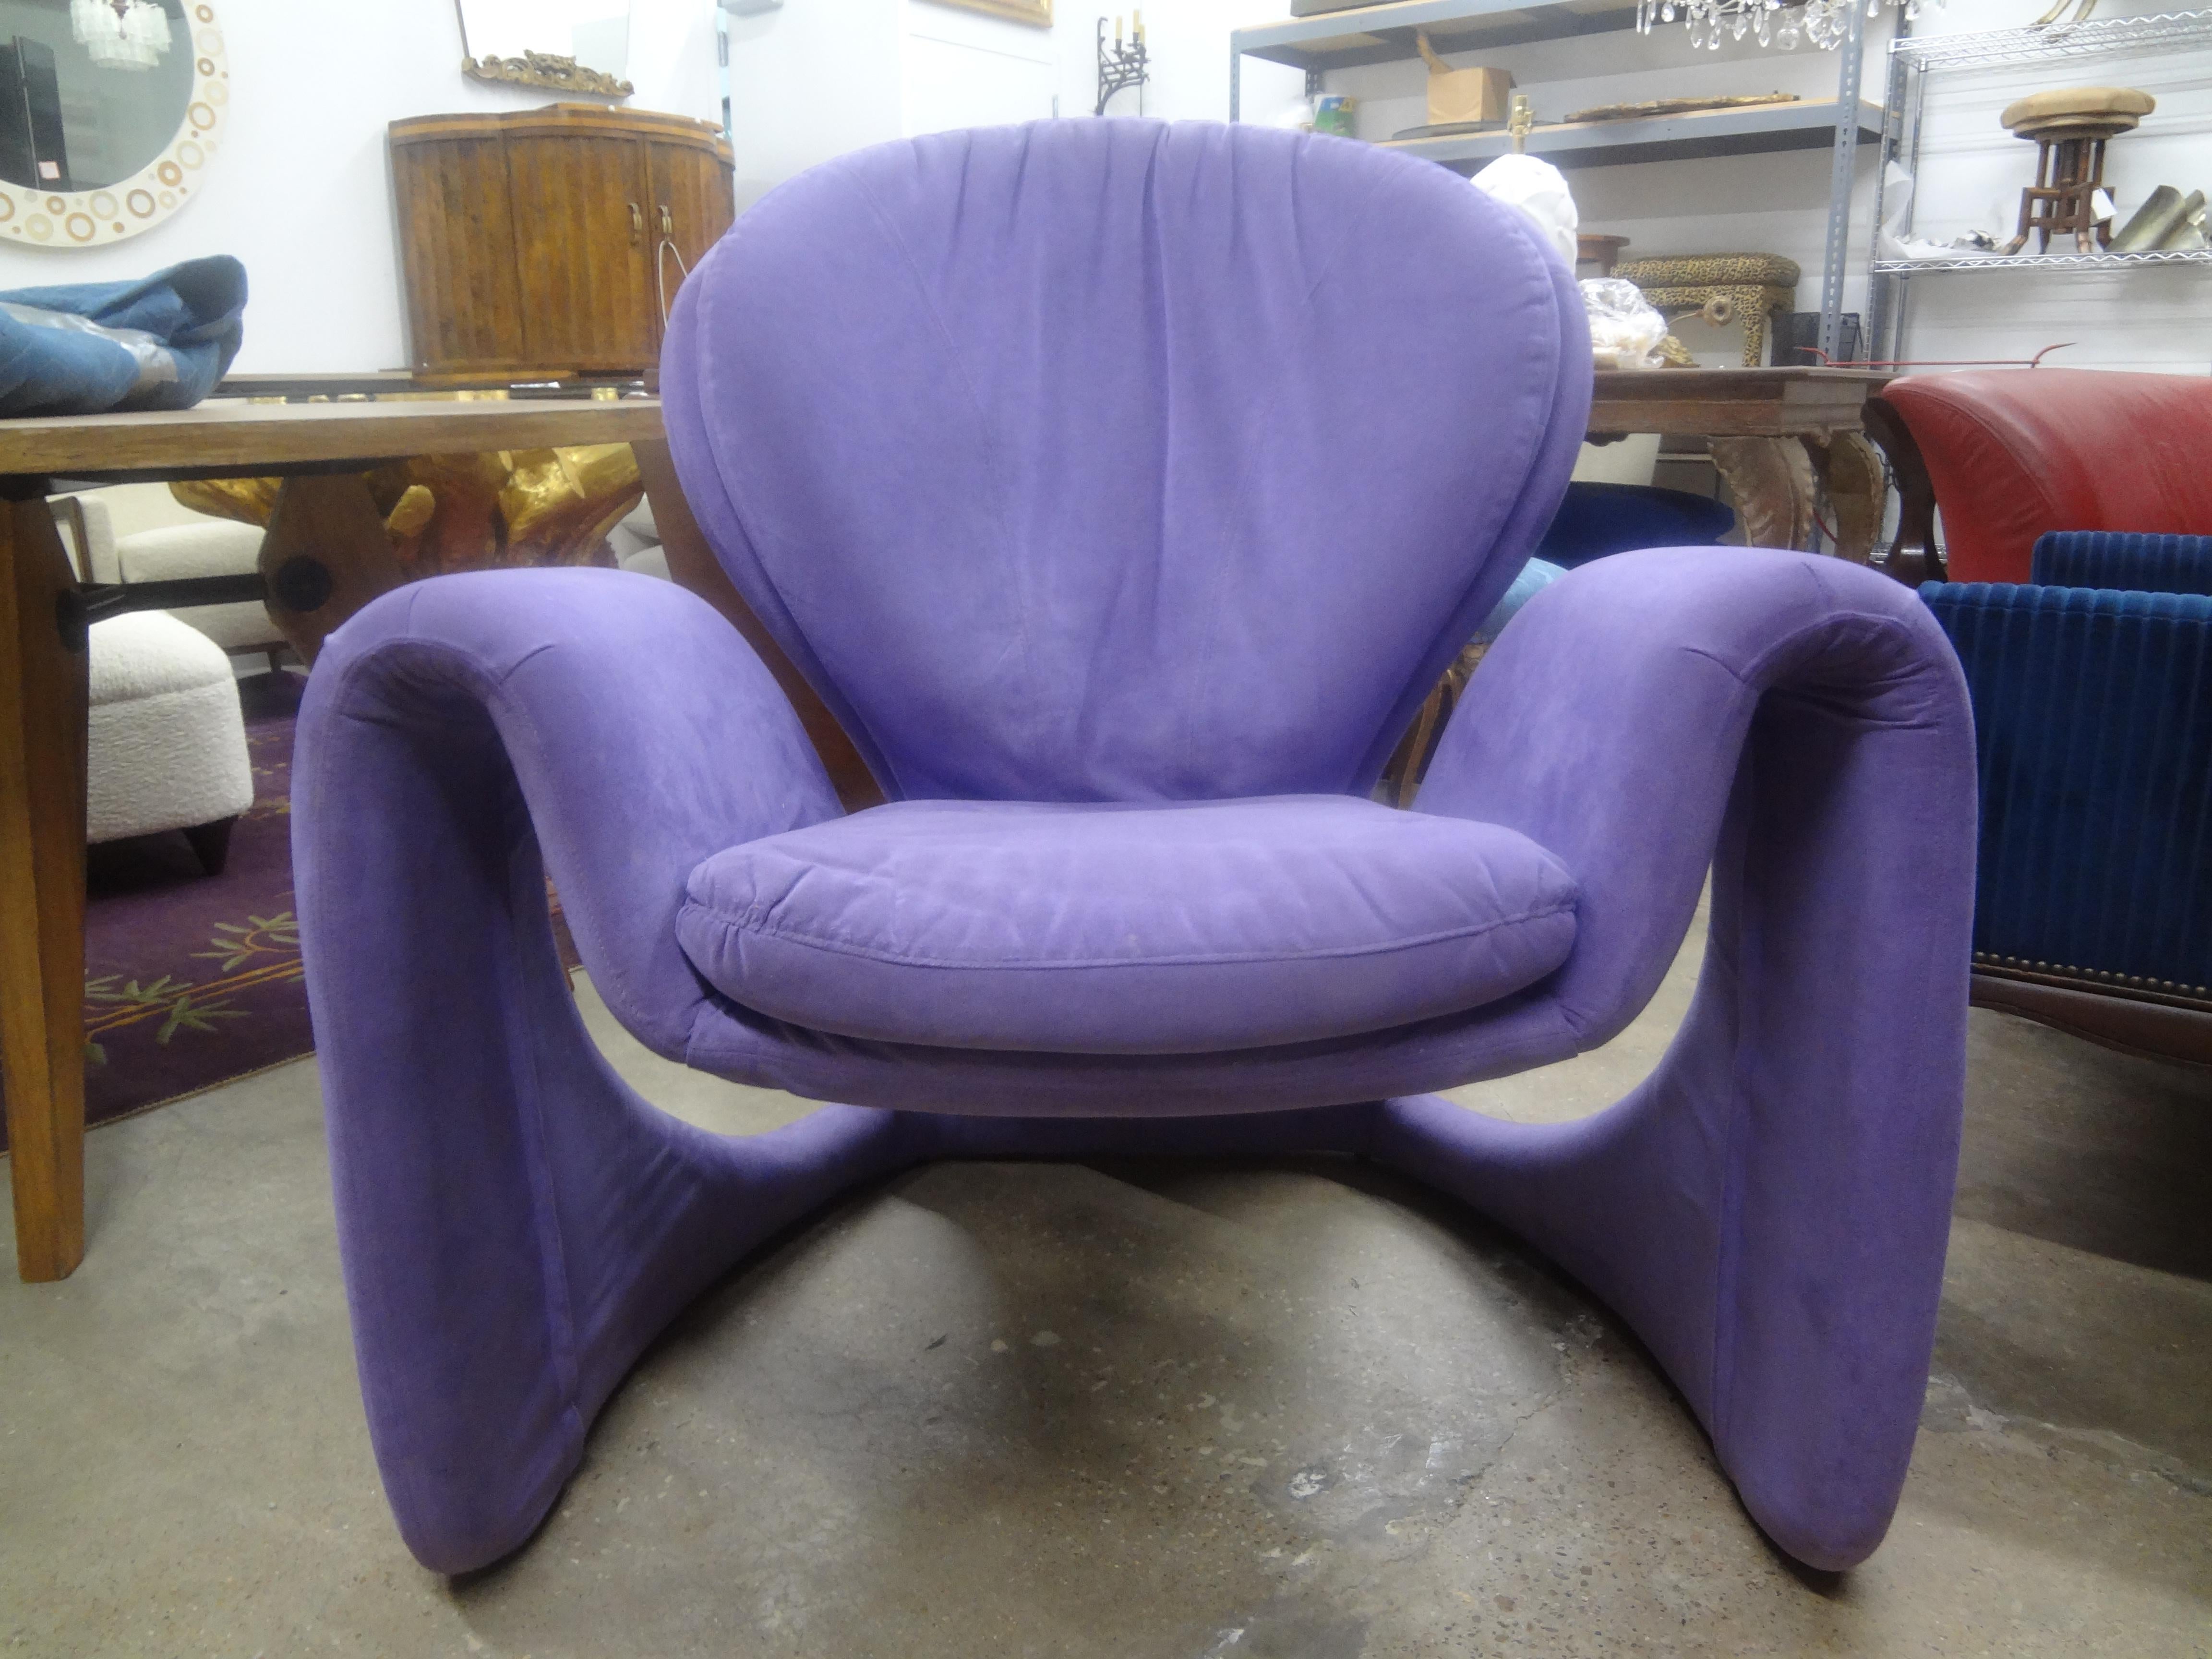 Post-Modern Italian Modern Sculptural Lounge Chair Attributed To Vittorio Introini  For Sale